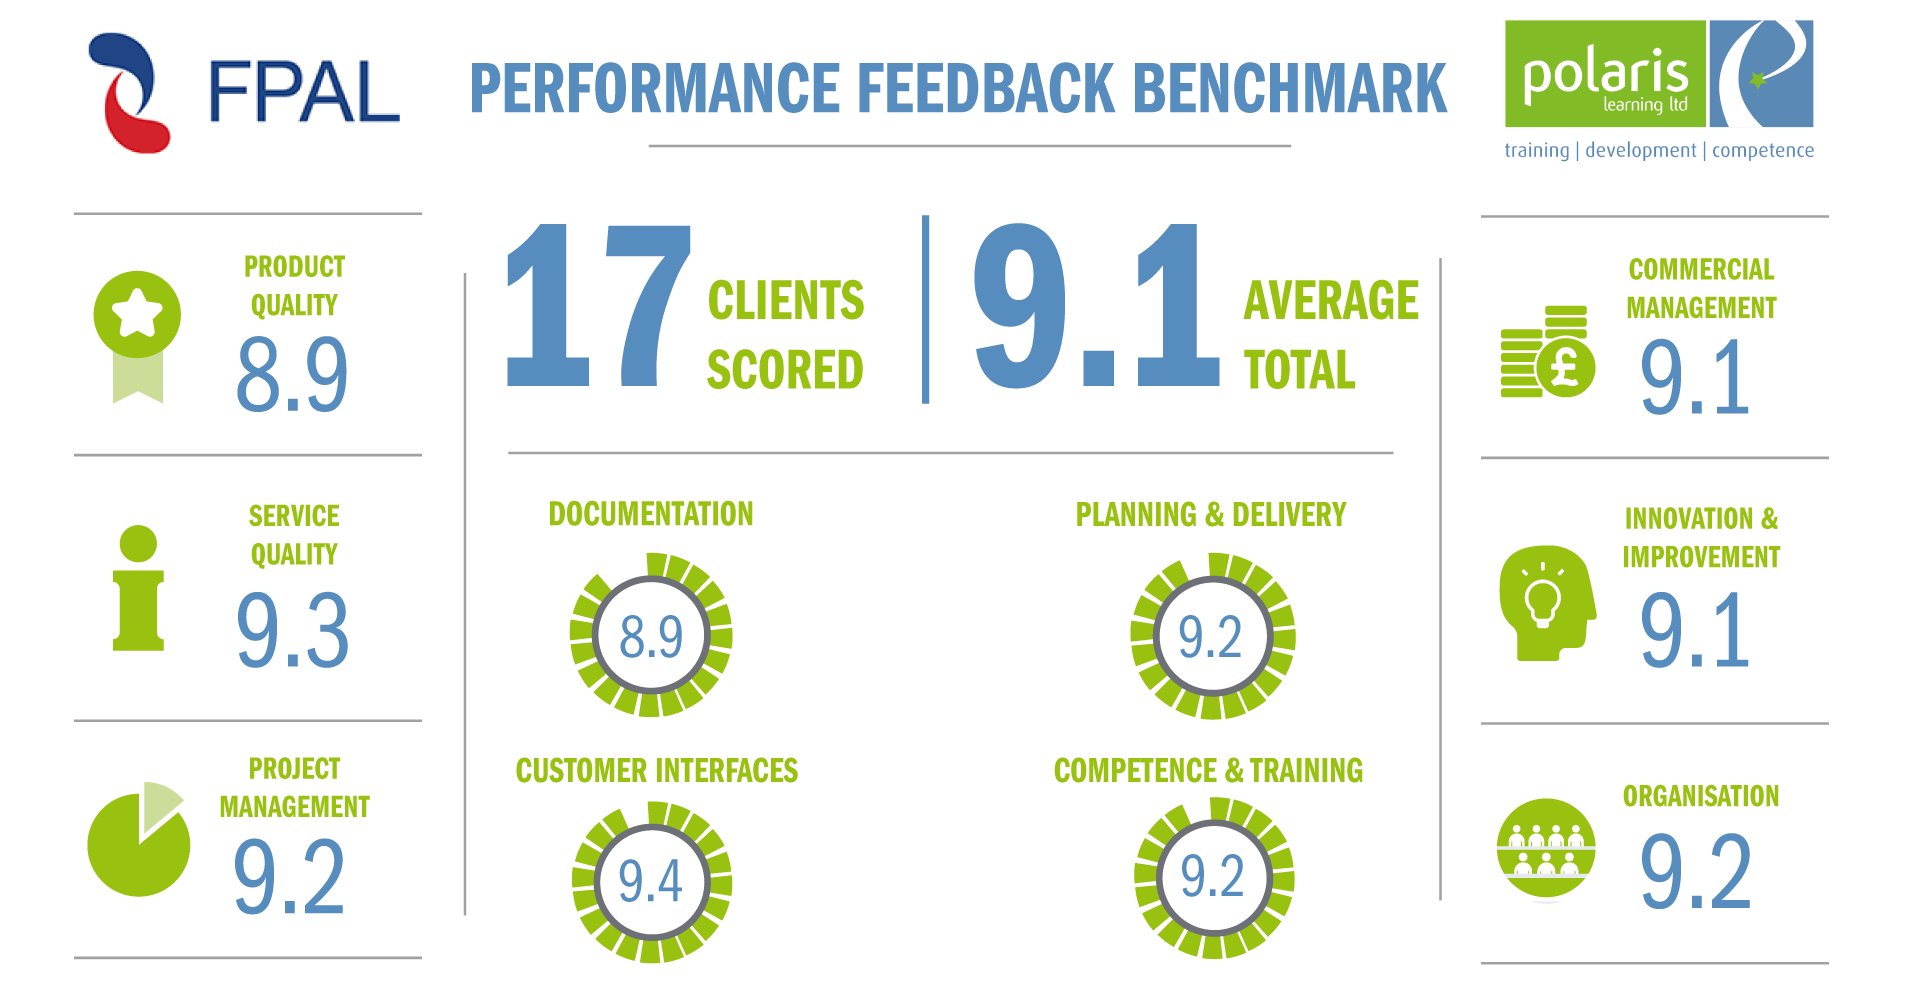 Feedback benchmark from our clients on FPAL